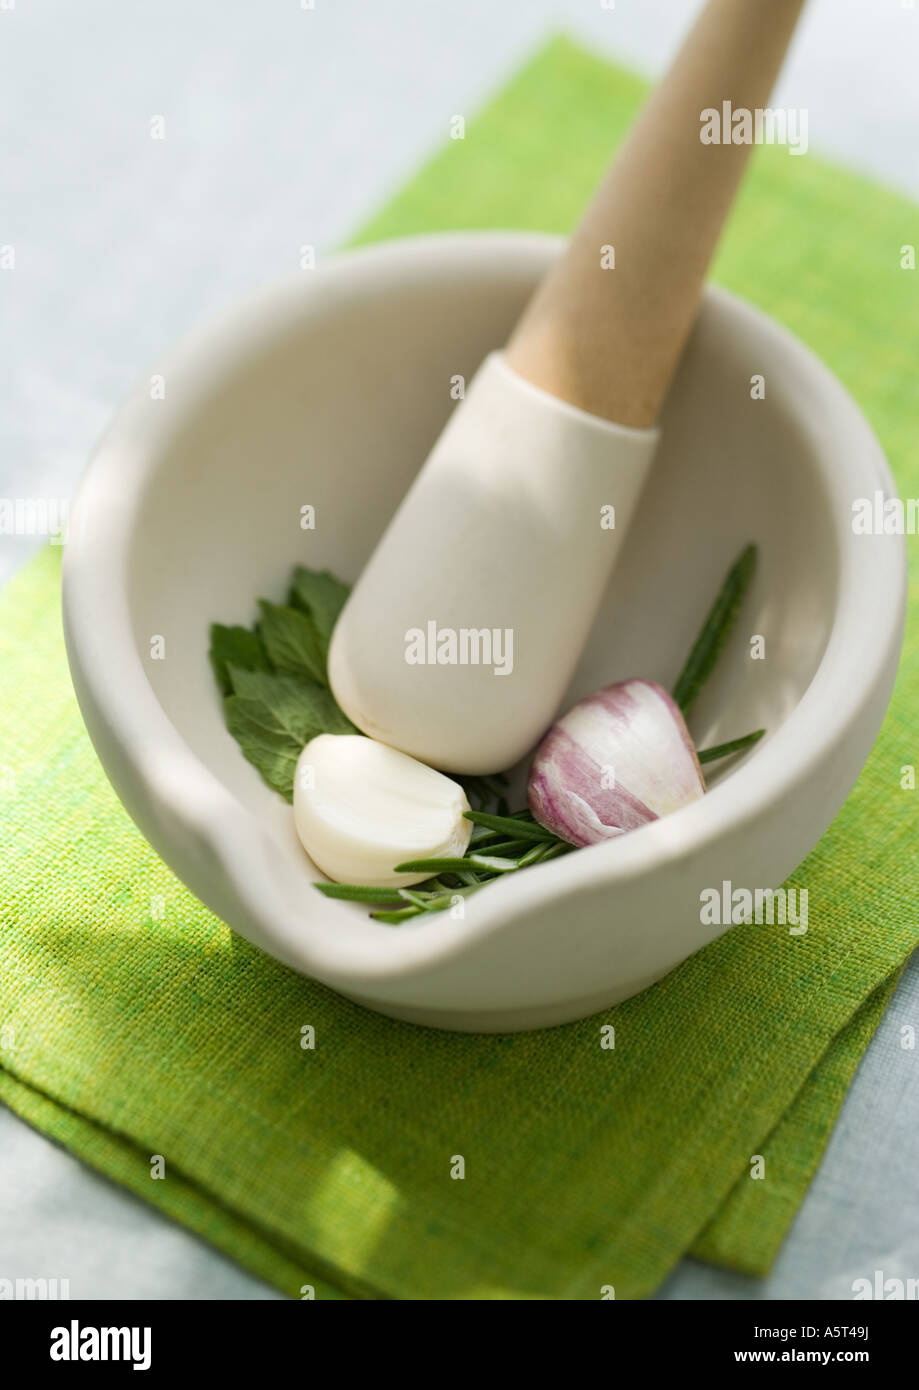 Mortar and pestle with herbs and garlic Stock Photo